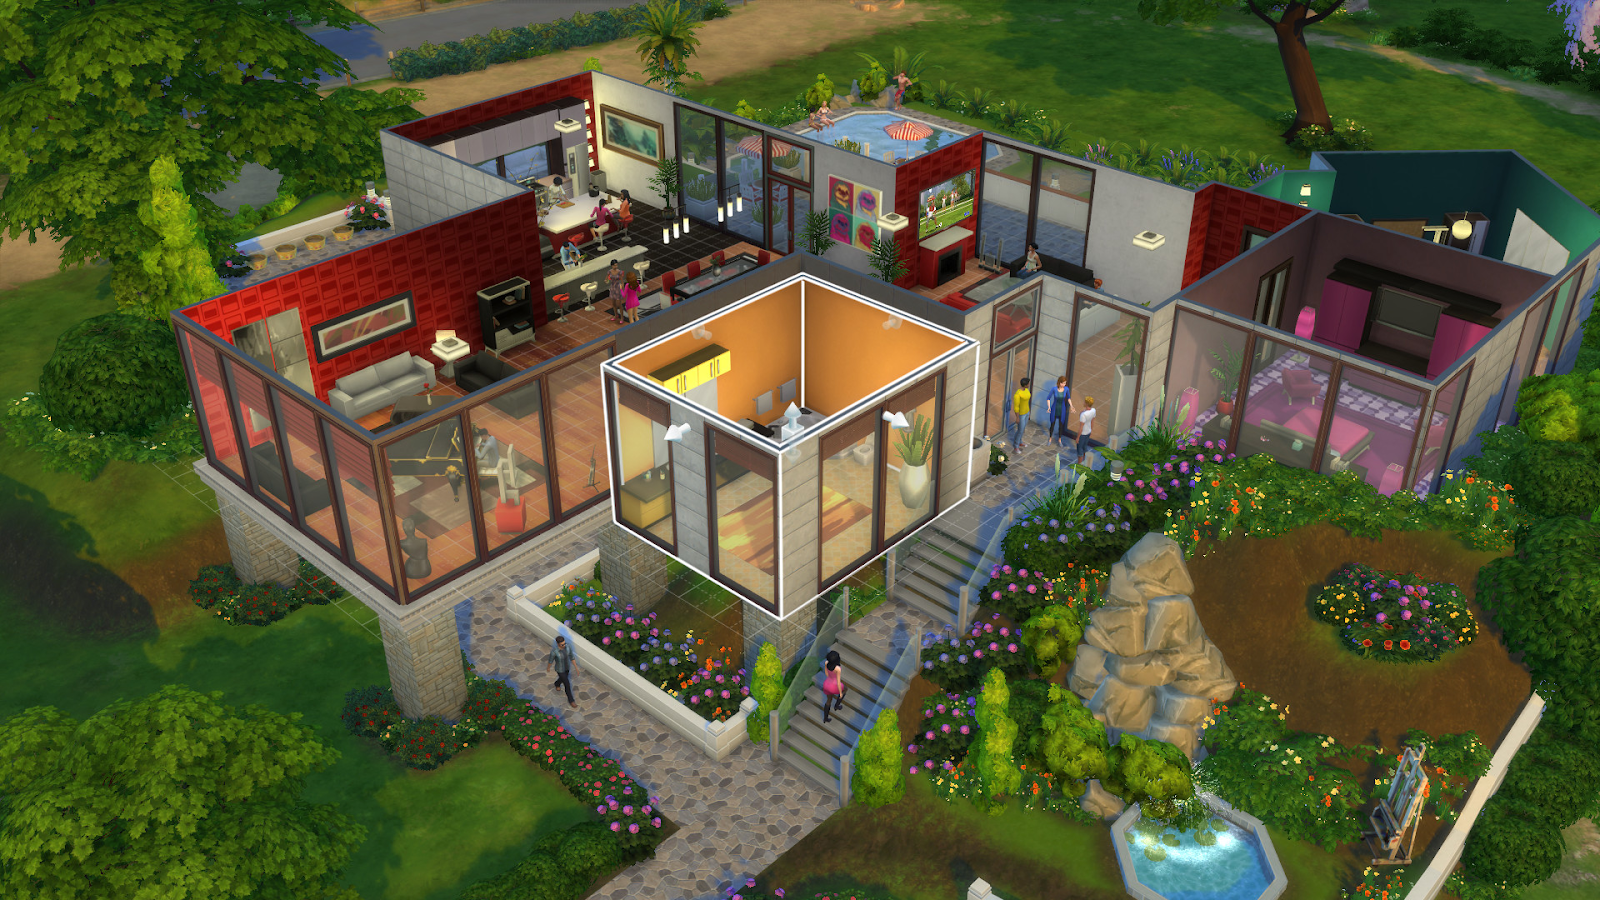 Image of the Sims Simulation Games